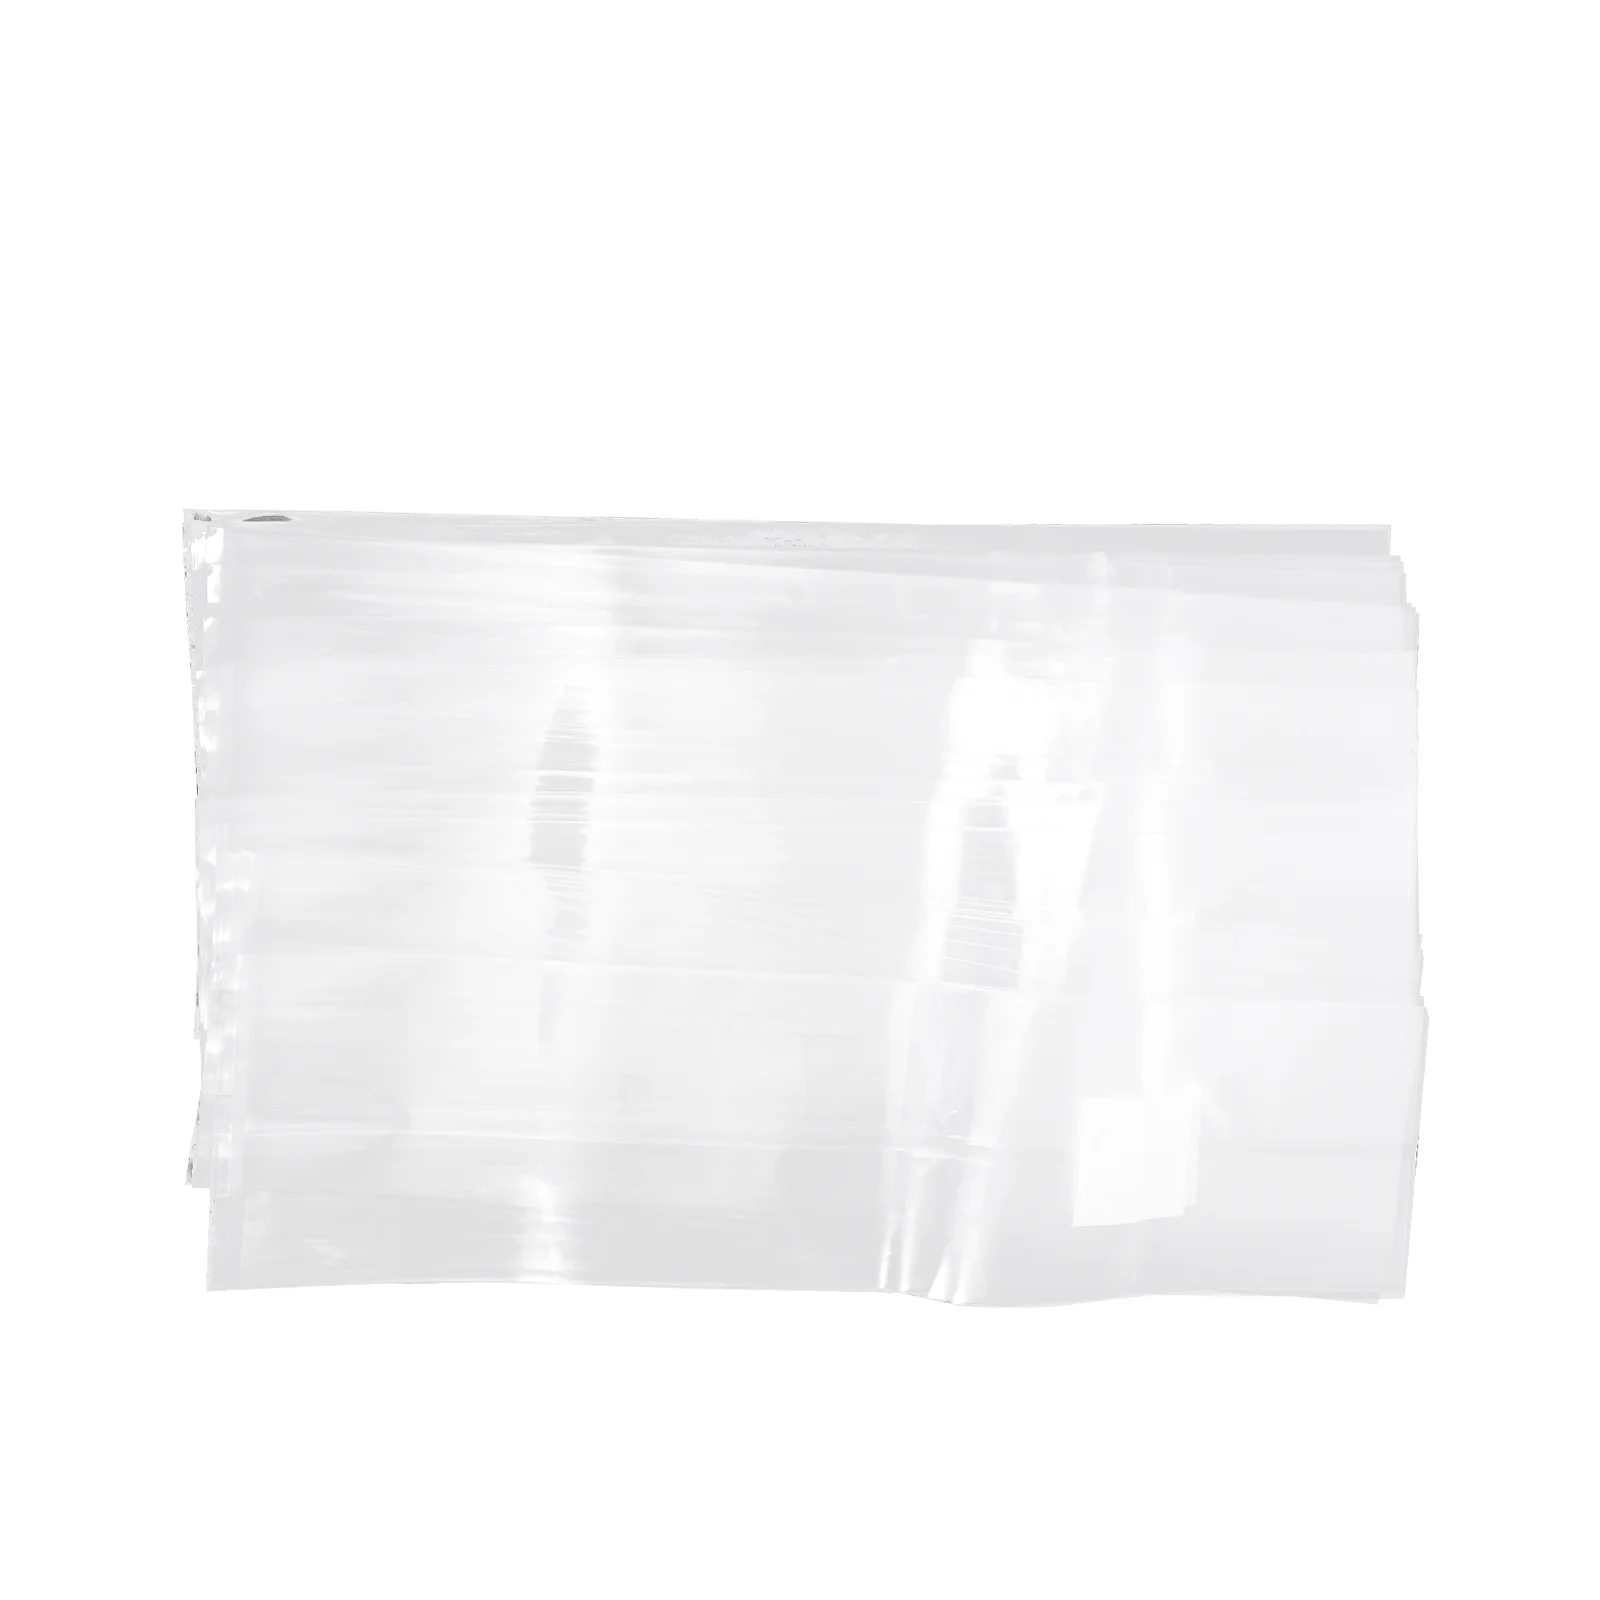 

50 Pcs Strain Bag Sealable Spawn Bags Mushroom Grain Farm- Vacuum Sealed Container Grow Cultivation Containers